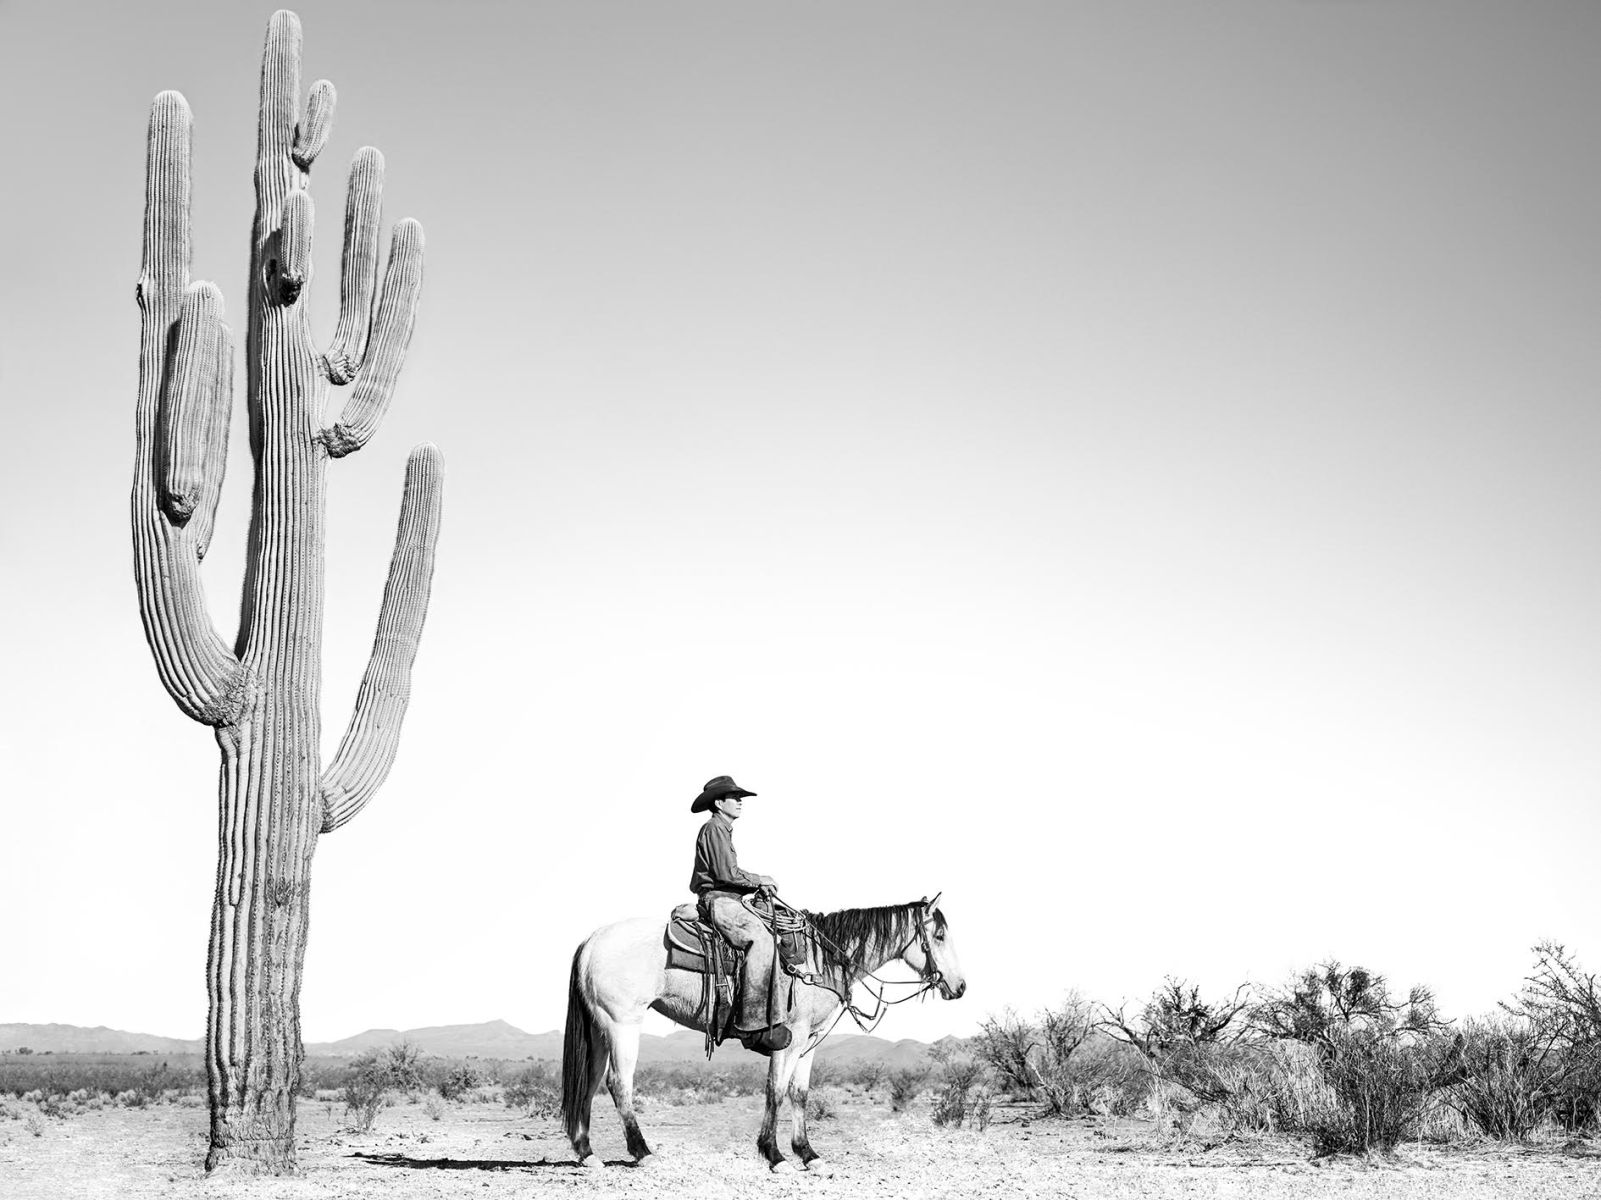 "This is Derrick next to a saguaro. He's one of the greatest guys out there. I mean, he's unbelievable,” Krantz says. "He grew up on Navajo land in very poor conditions with no electricity and no running water. He's just this legend. He's done extremely well in the rodeo world and carved a path for others so they know it's possible. I was amazed that there are Native American people who also are cowboys and ranchers and in the rodeo. I didn't know that. I think most people don't know that. Derrick is really just a tremendous source of inspiration, whether it's for Native Americans or other people.”